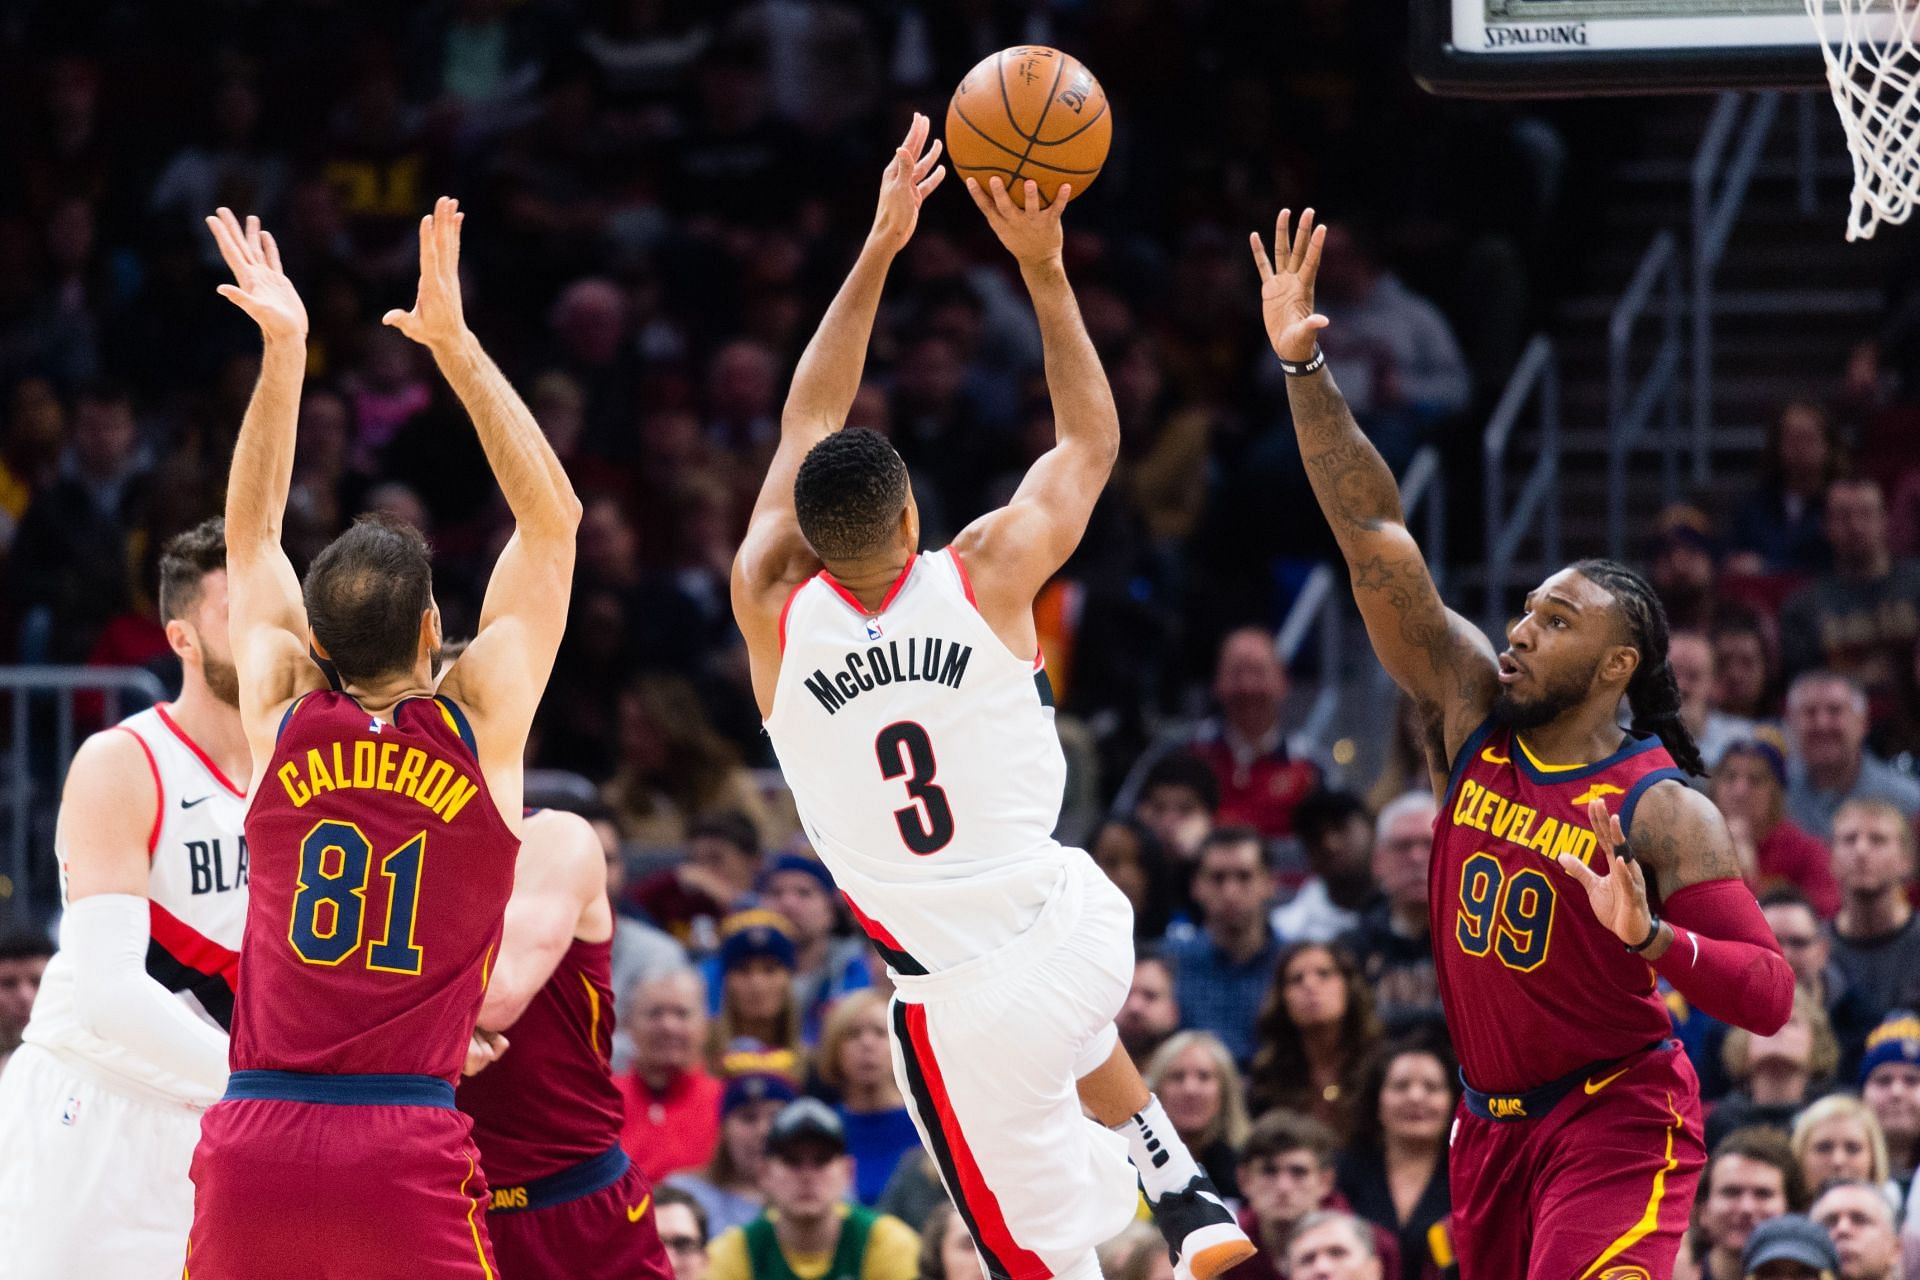 The Portland Trail Blazers will take on the Cleveland Cavaliers on November 3.